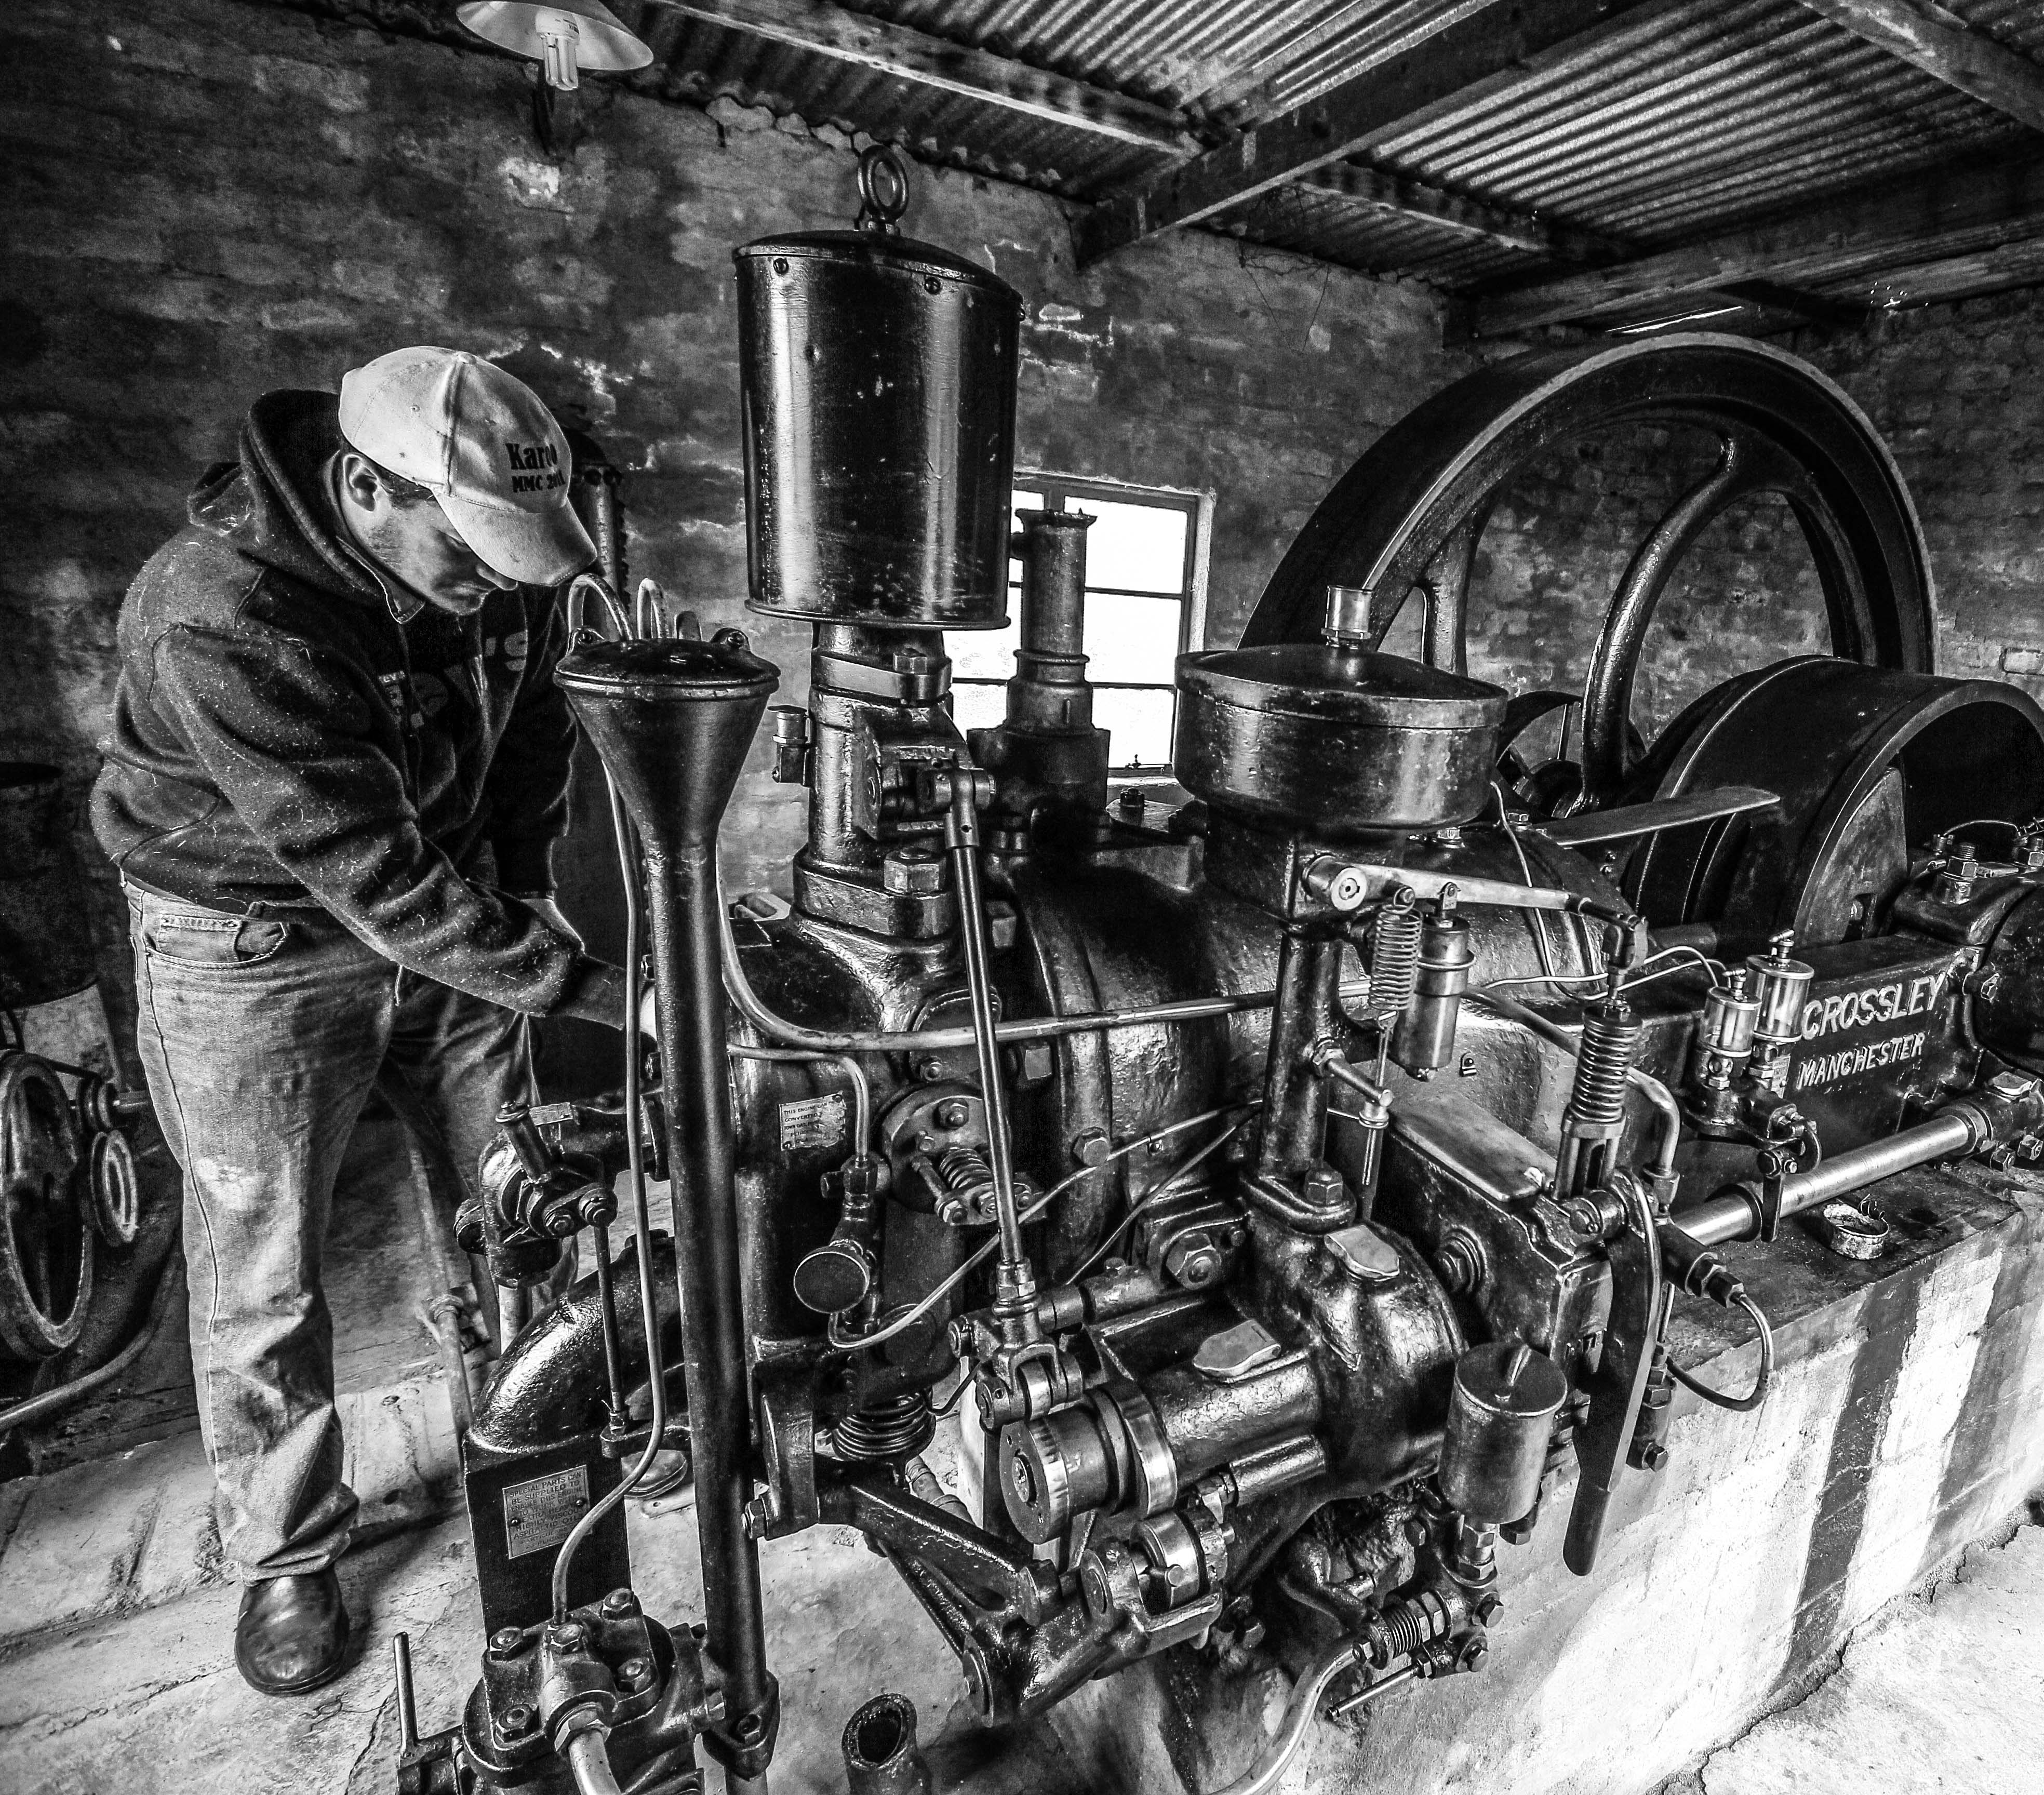 Aberdeen: One of the long-serving standing generator engines that once lit up the Cango Caves, now on display at Waterkloof Farm outside Aberdeen. Image: Chris Marais